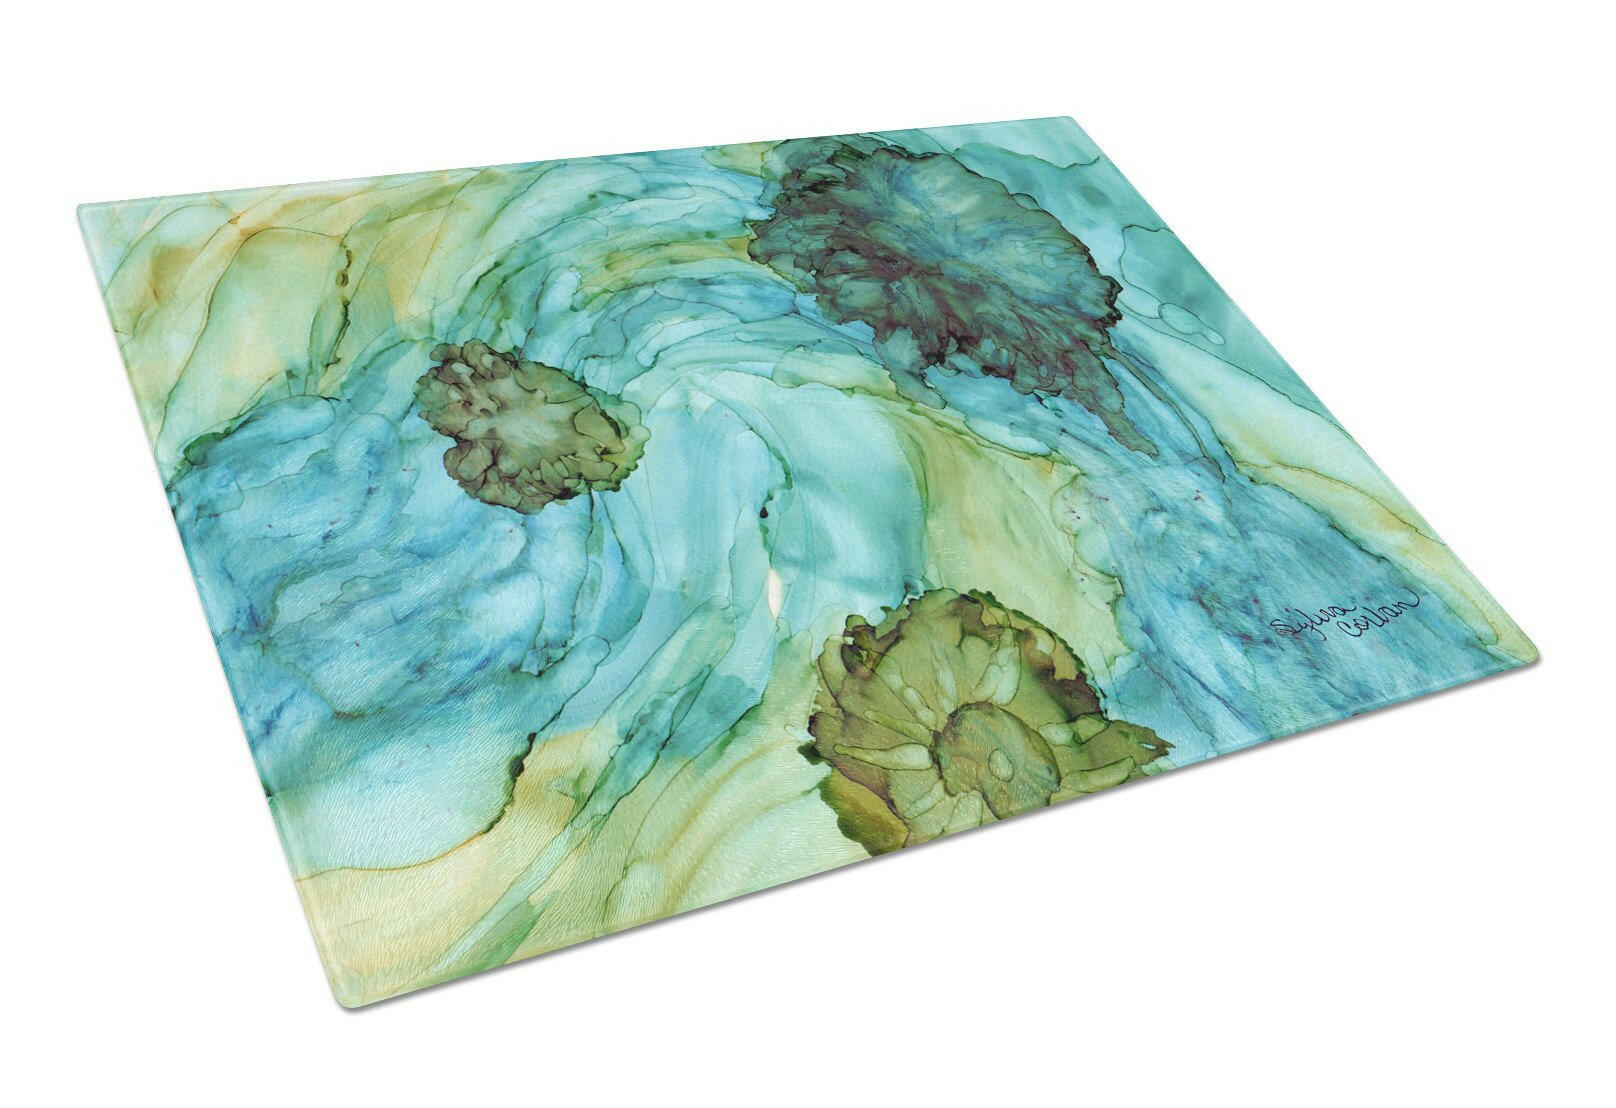 Abstract in Teal Flowers Glass Cutting Board Large 8952LCB by Caroline's Treasures